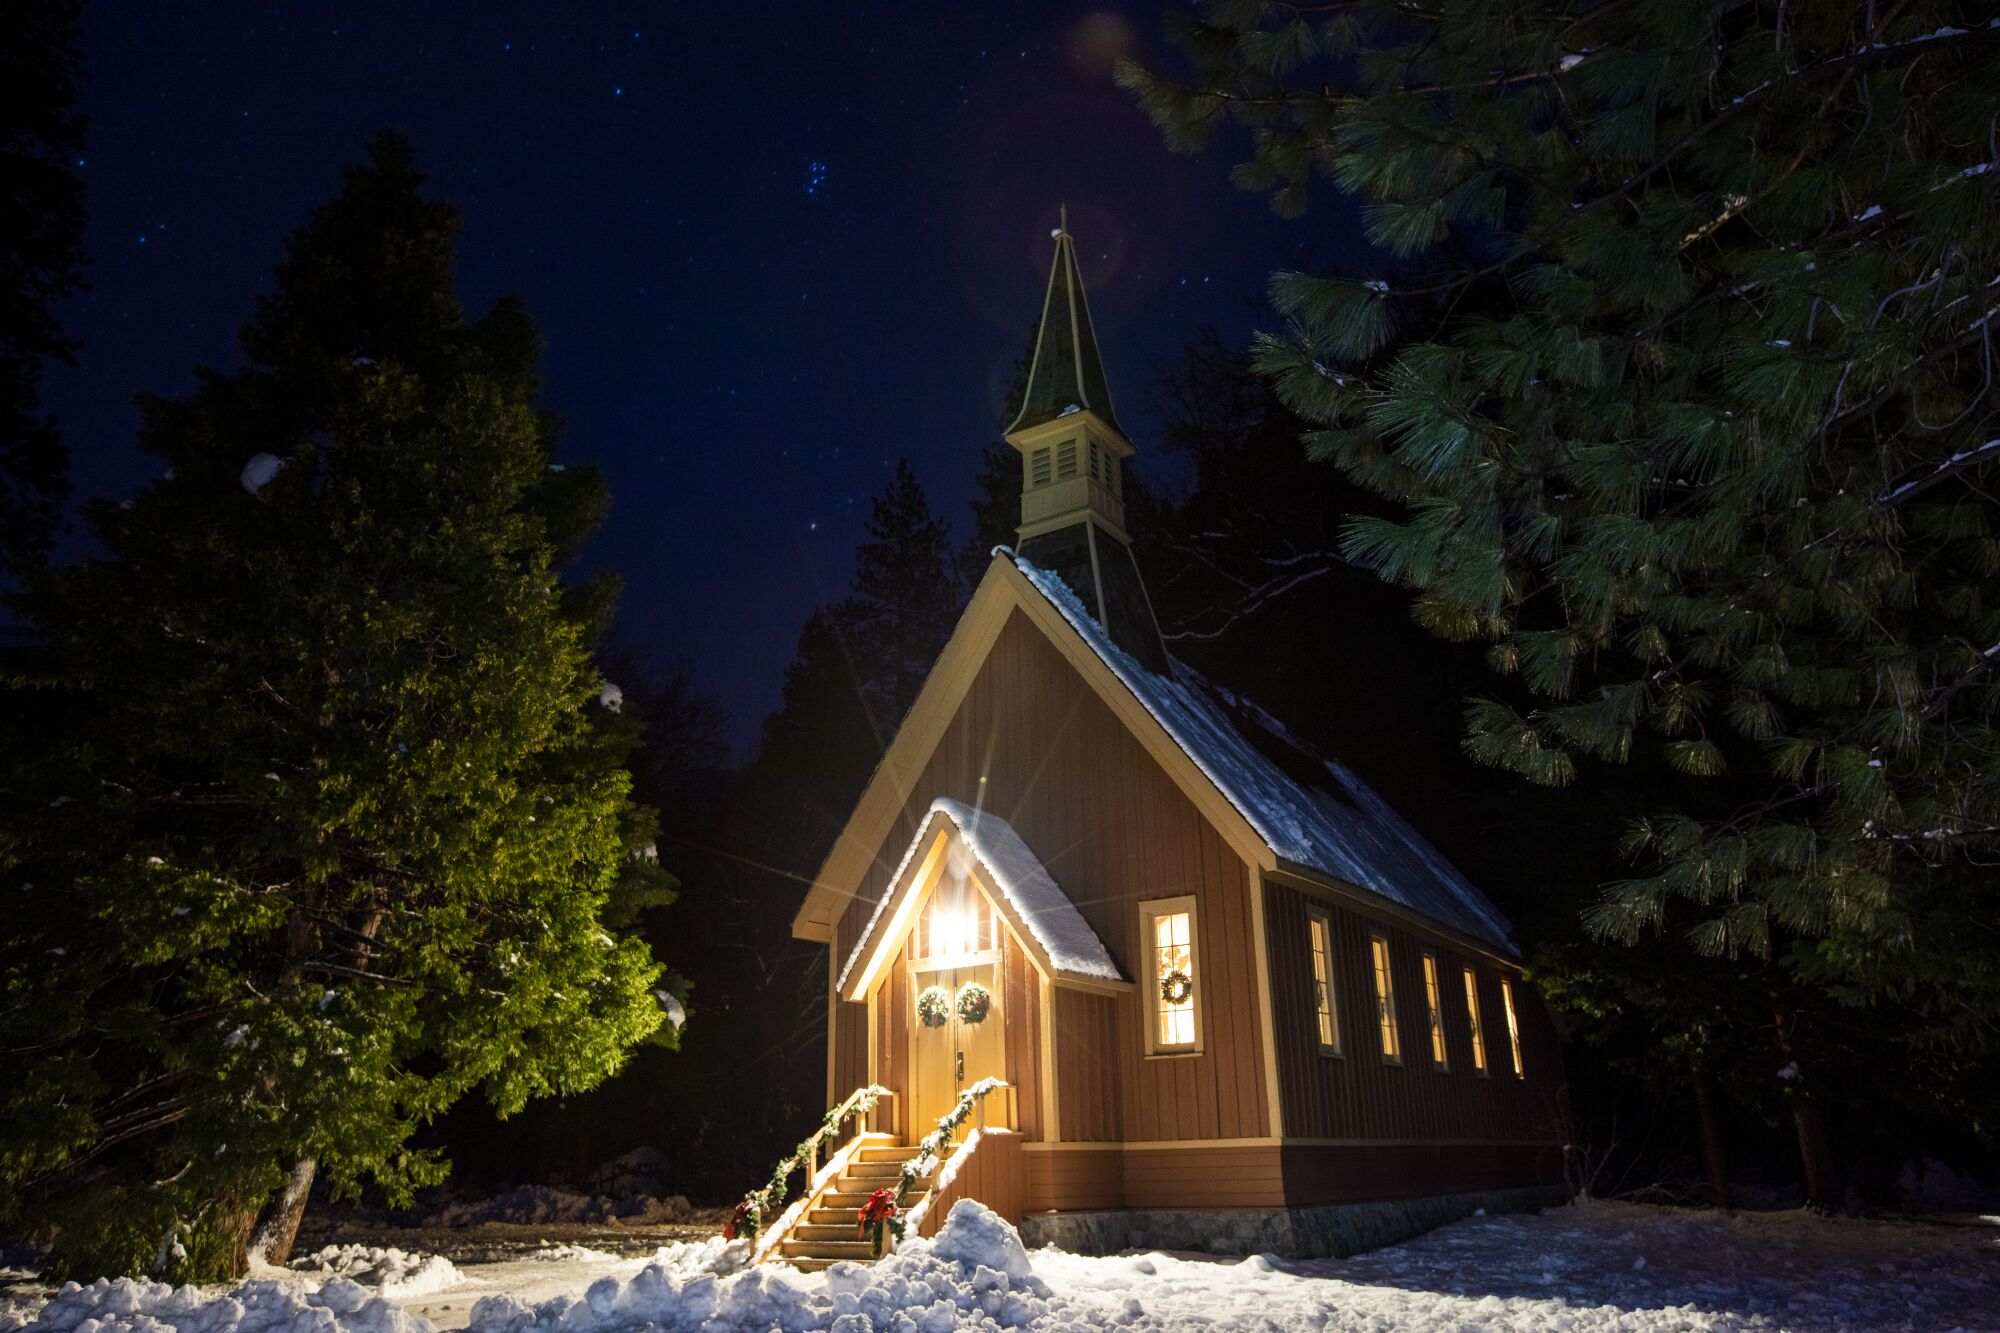 Light shines from a small, many-windowed building with a steeple flanked by evergreens under a night sky.